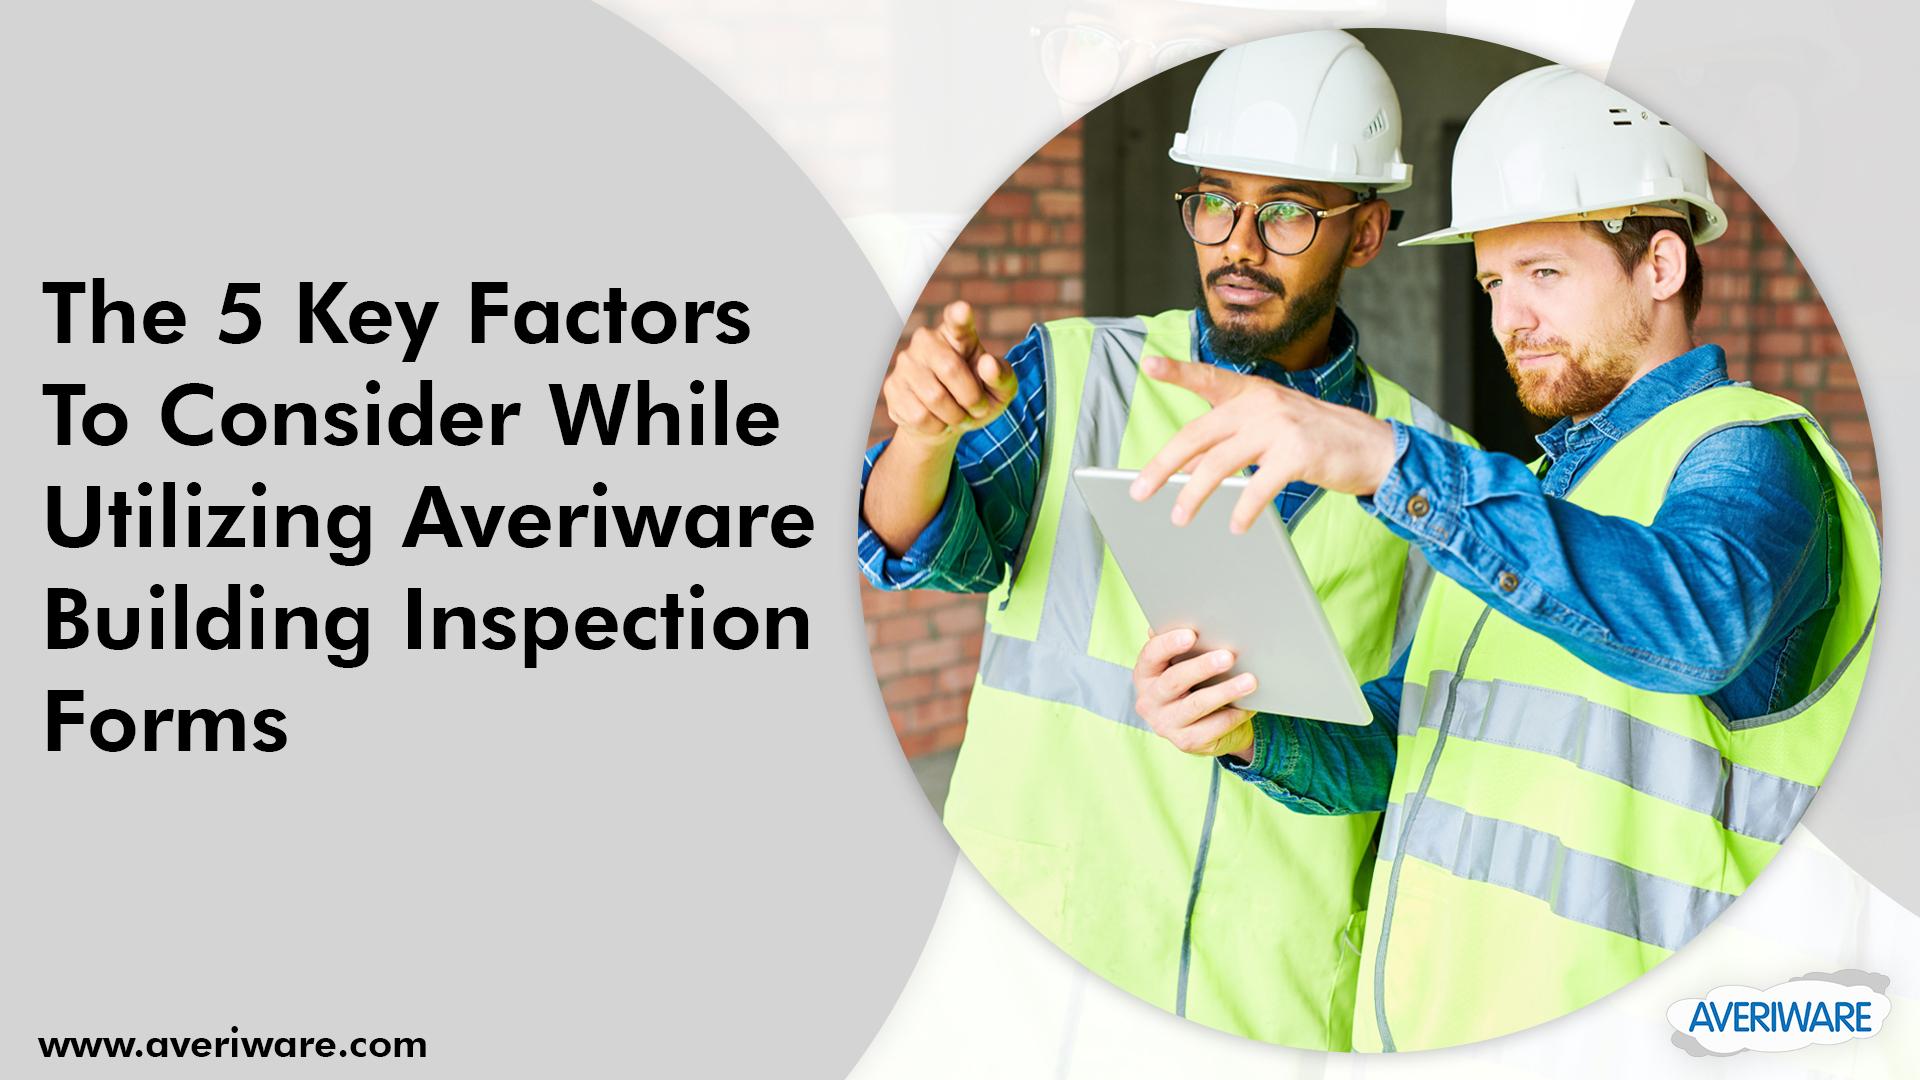 Things to Look for When Using Averiware Building Inspection Forms